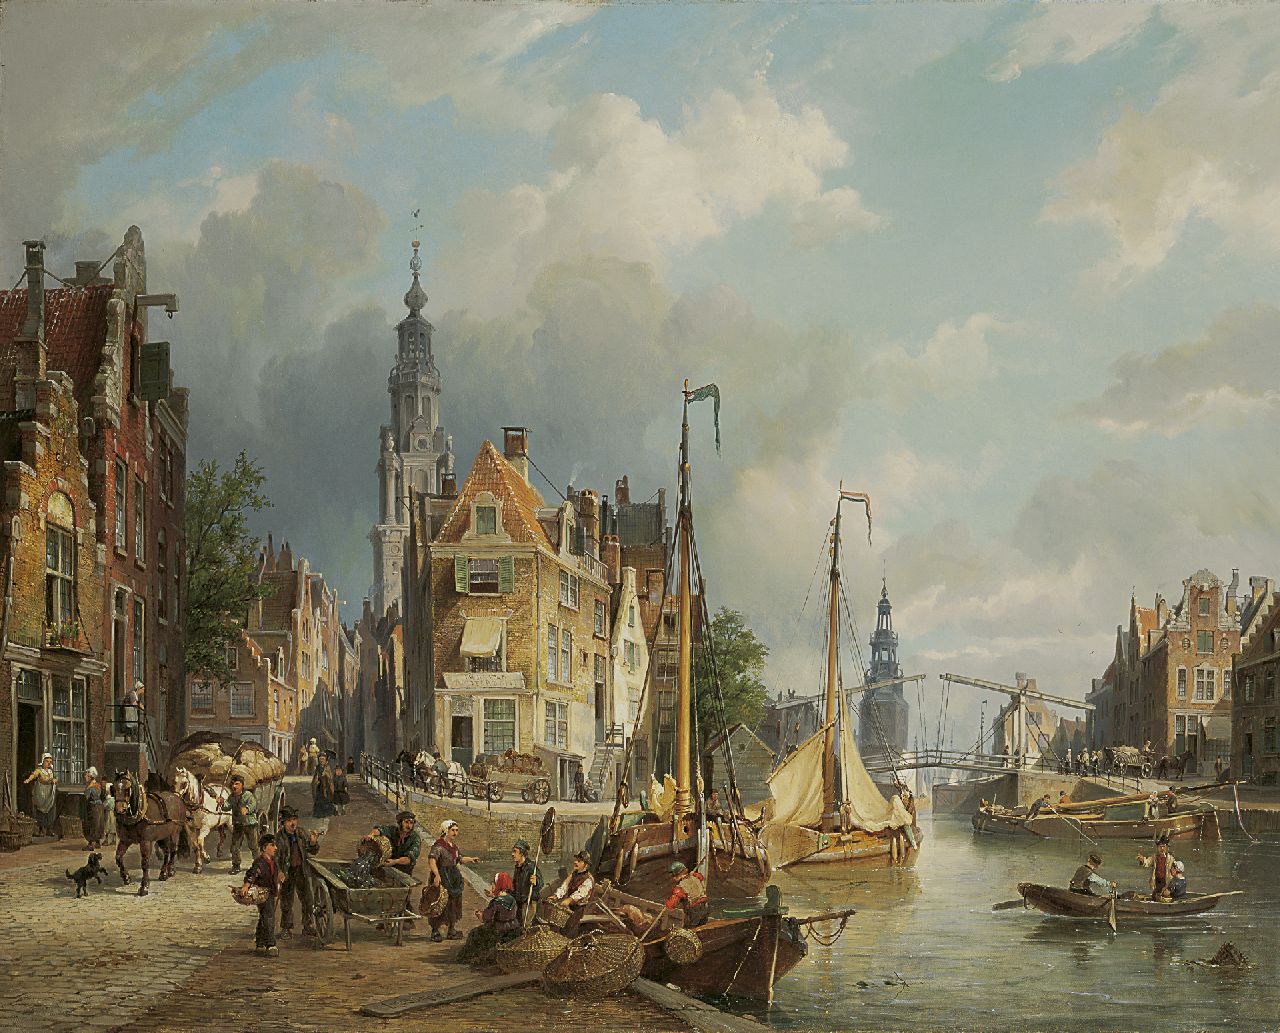 Dommelshuizen C.C.  | Cornelis Christiaan Dommelshuizen, The Zwanenburgwal with the Montelbaanstoren in the distance, Amsterdam, oil on canvas 61.6 x 76.5 cm, signed l.c. and with initials on the fish cart and dated 'Bruxelles 1873'